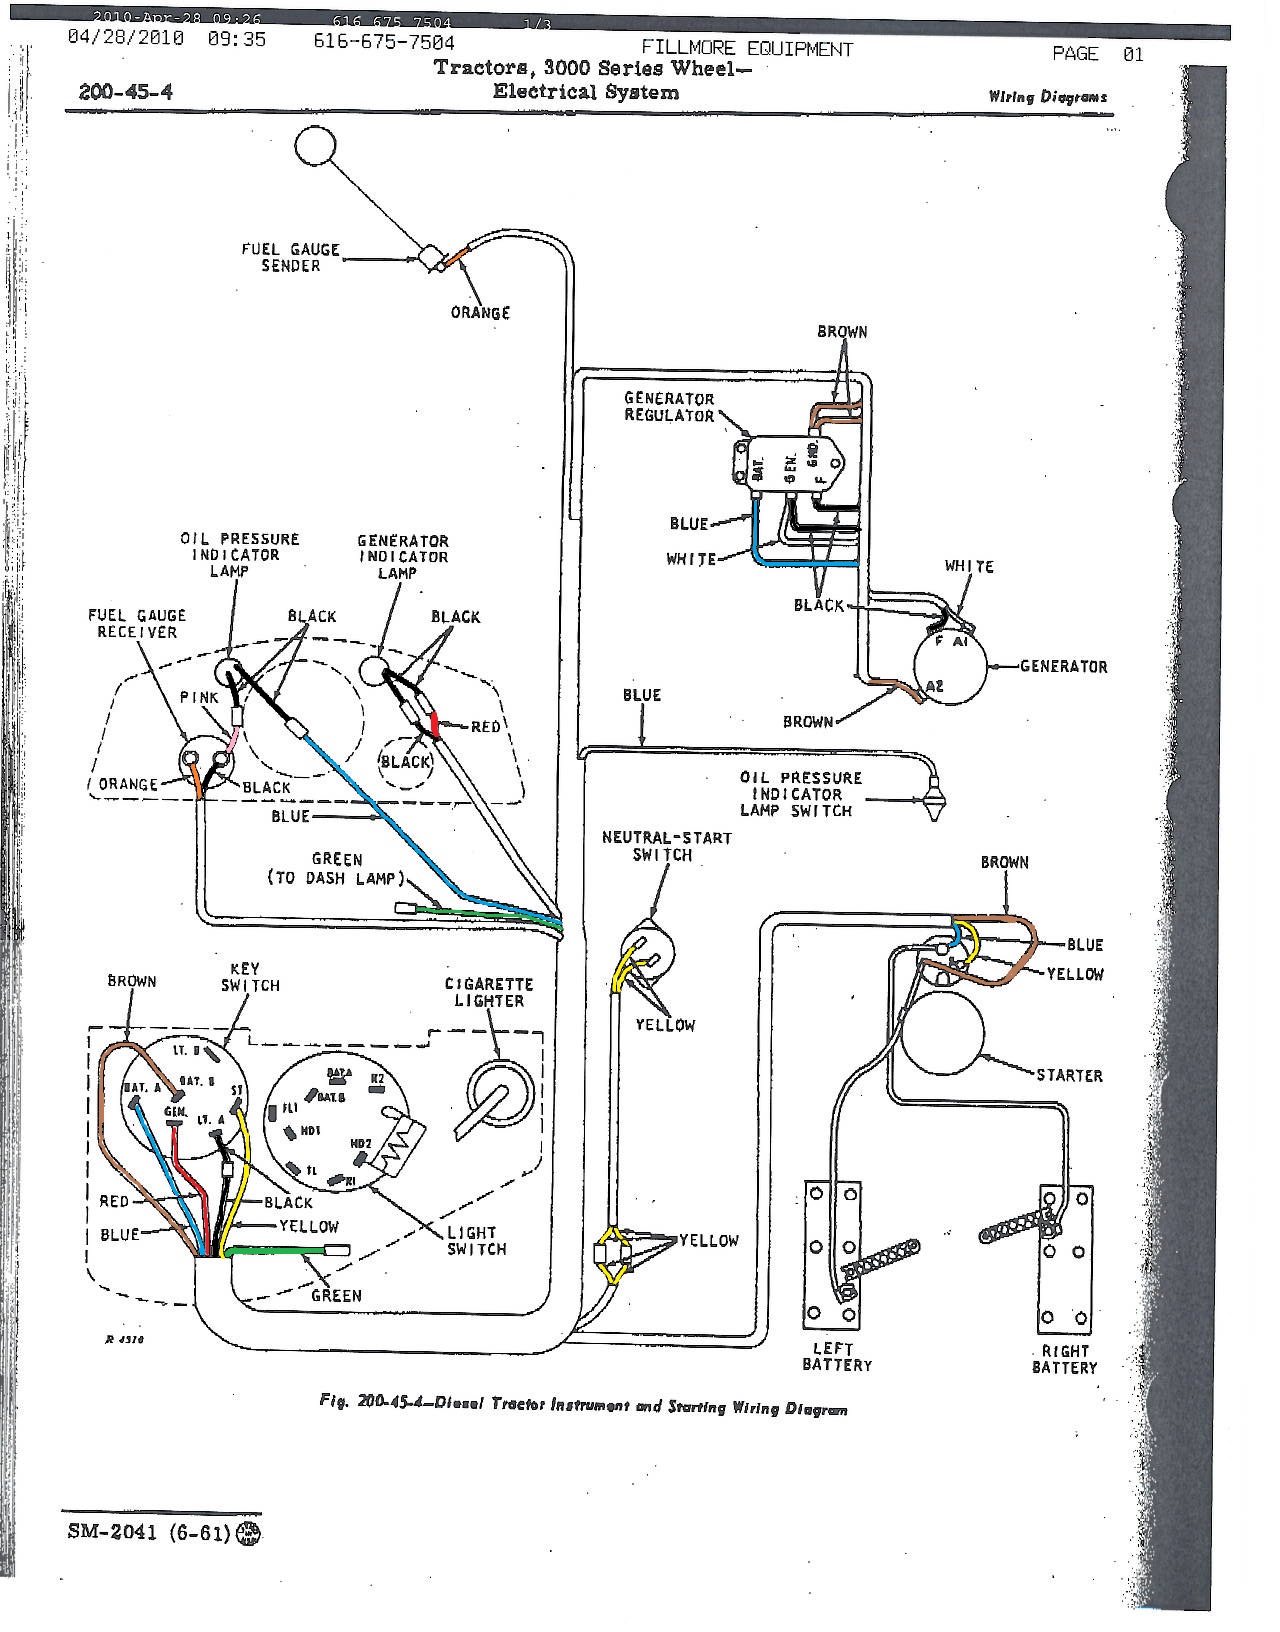 Diesel Tractor Ignition Switch Wiring Diagram from diagramweb.net